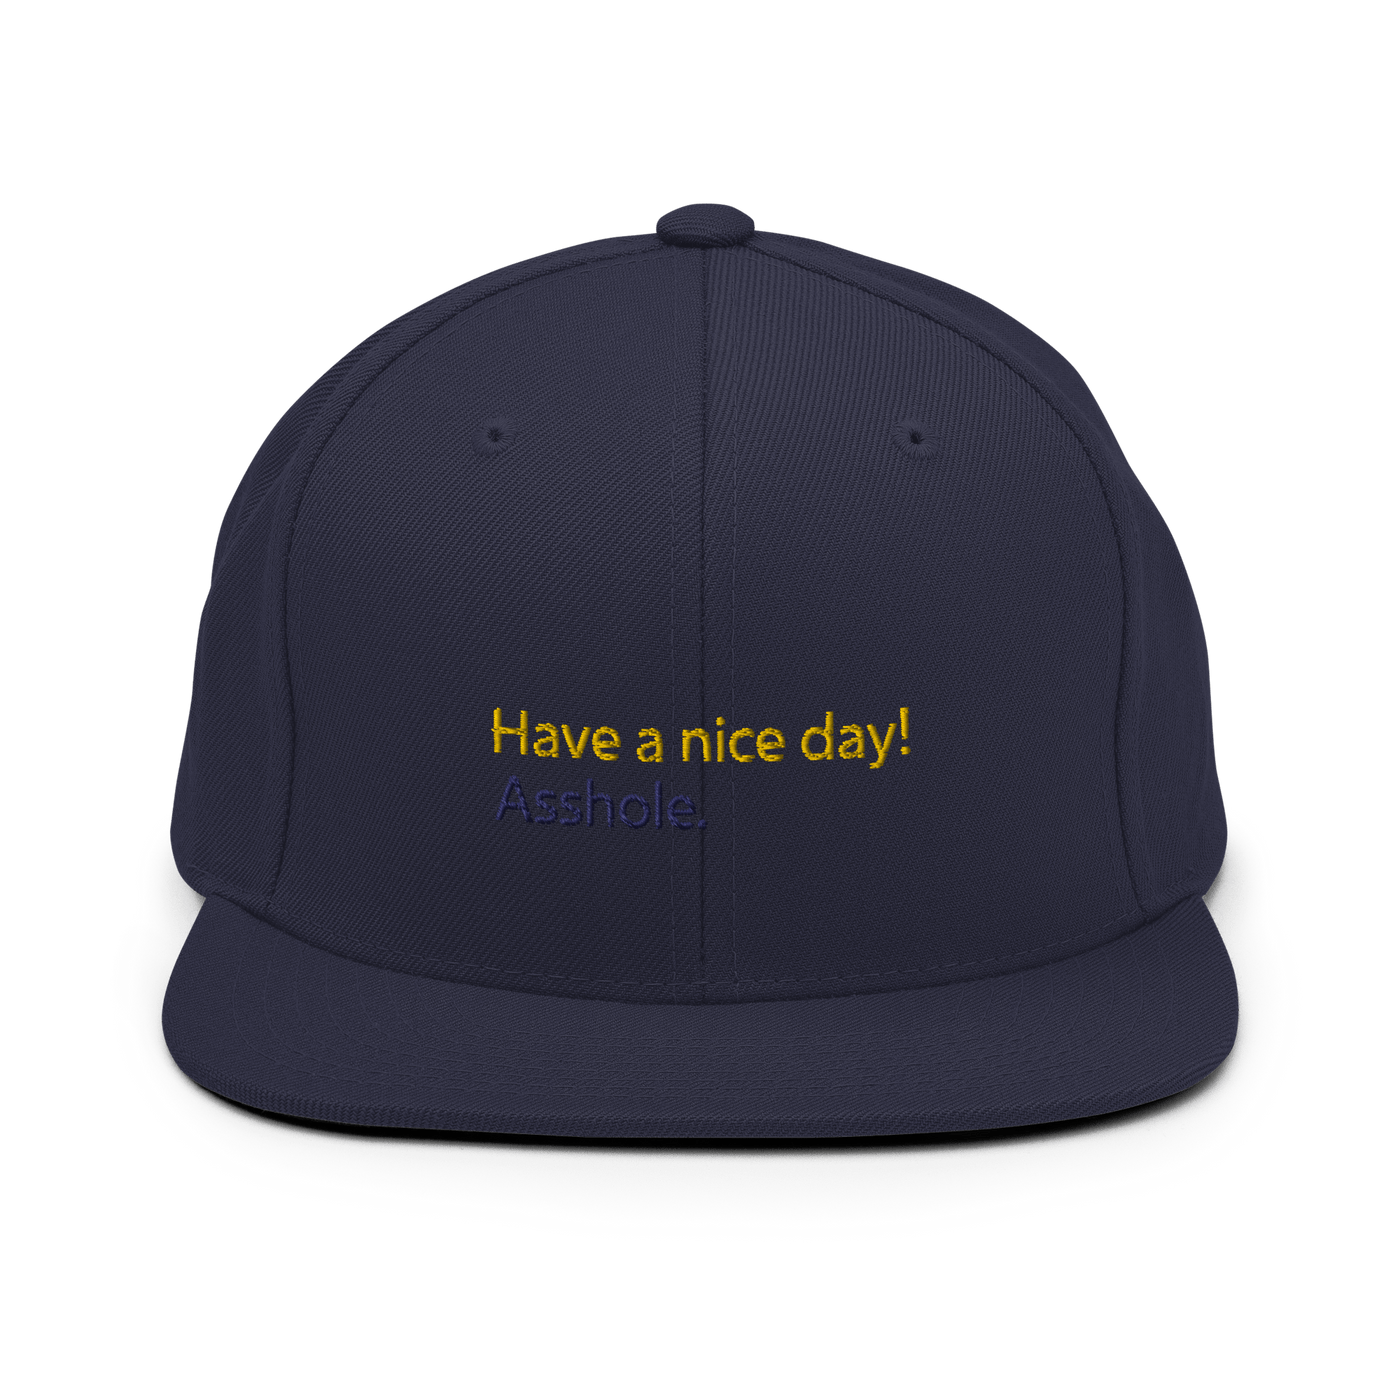 Have a nice day! (asshole) Snapback Hat - Navy - - Just Another Cap Store